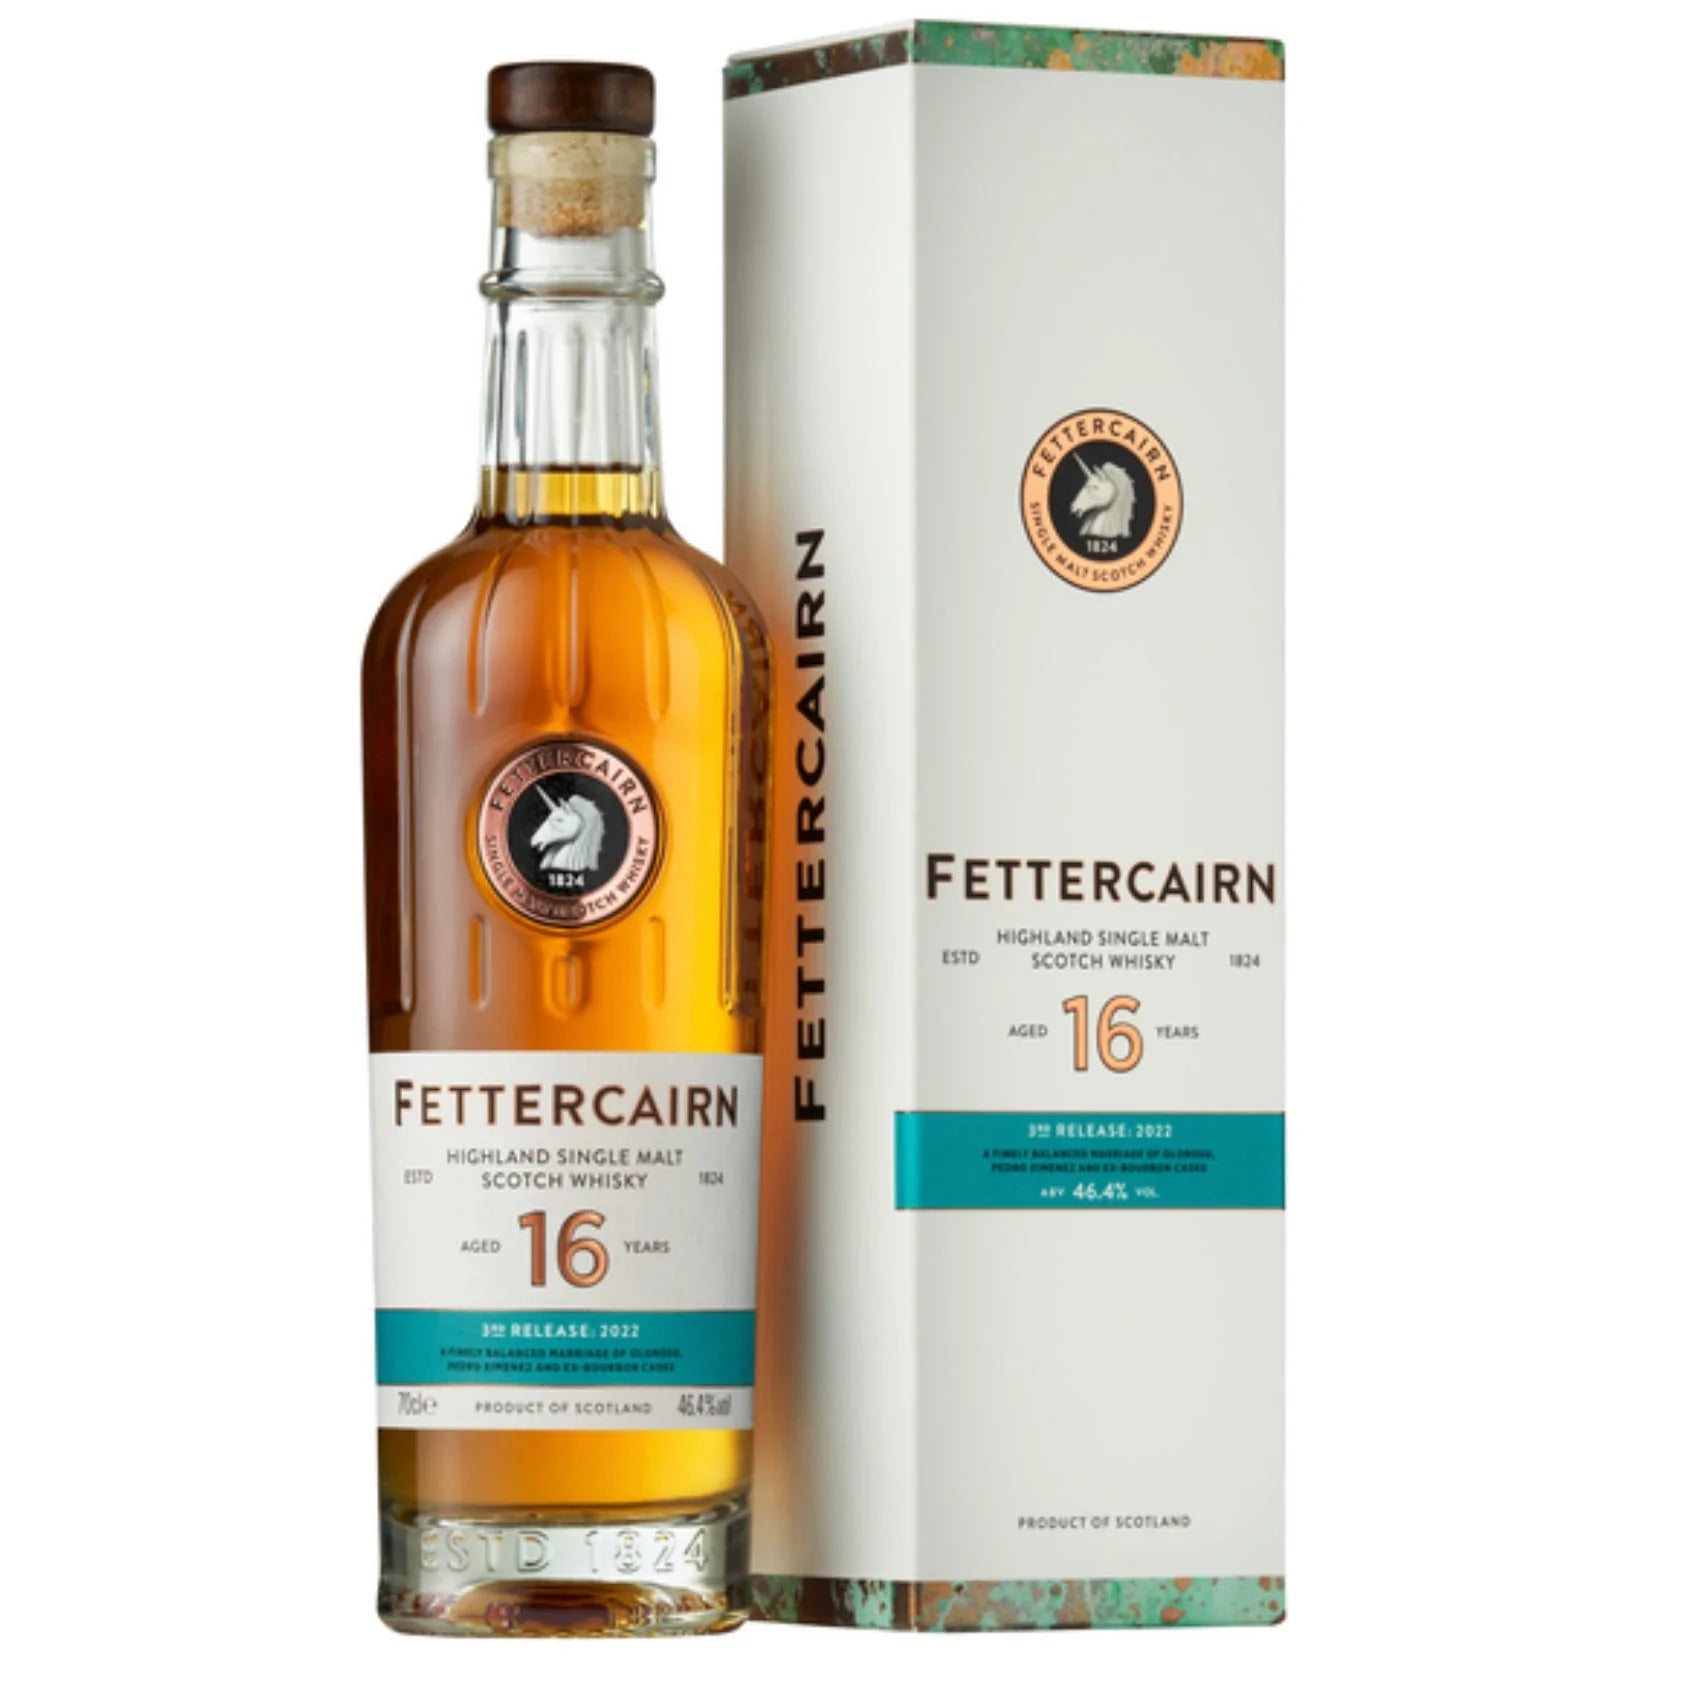 Fettercairn 16 Years Old Highland Single Malt 3rd Release 2022 46,4% Vol. 0,7l in Giftbox